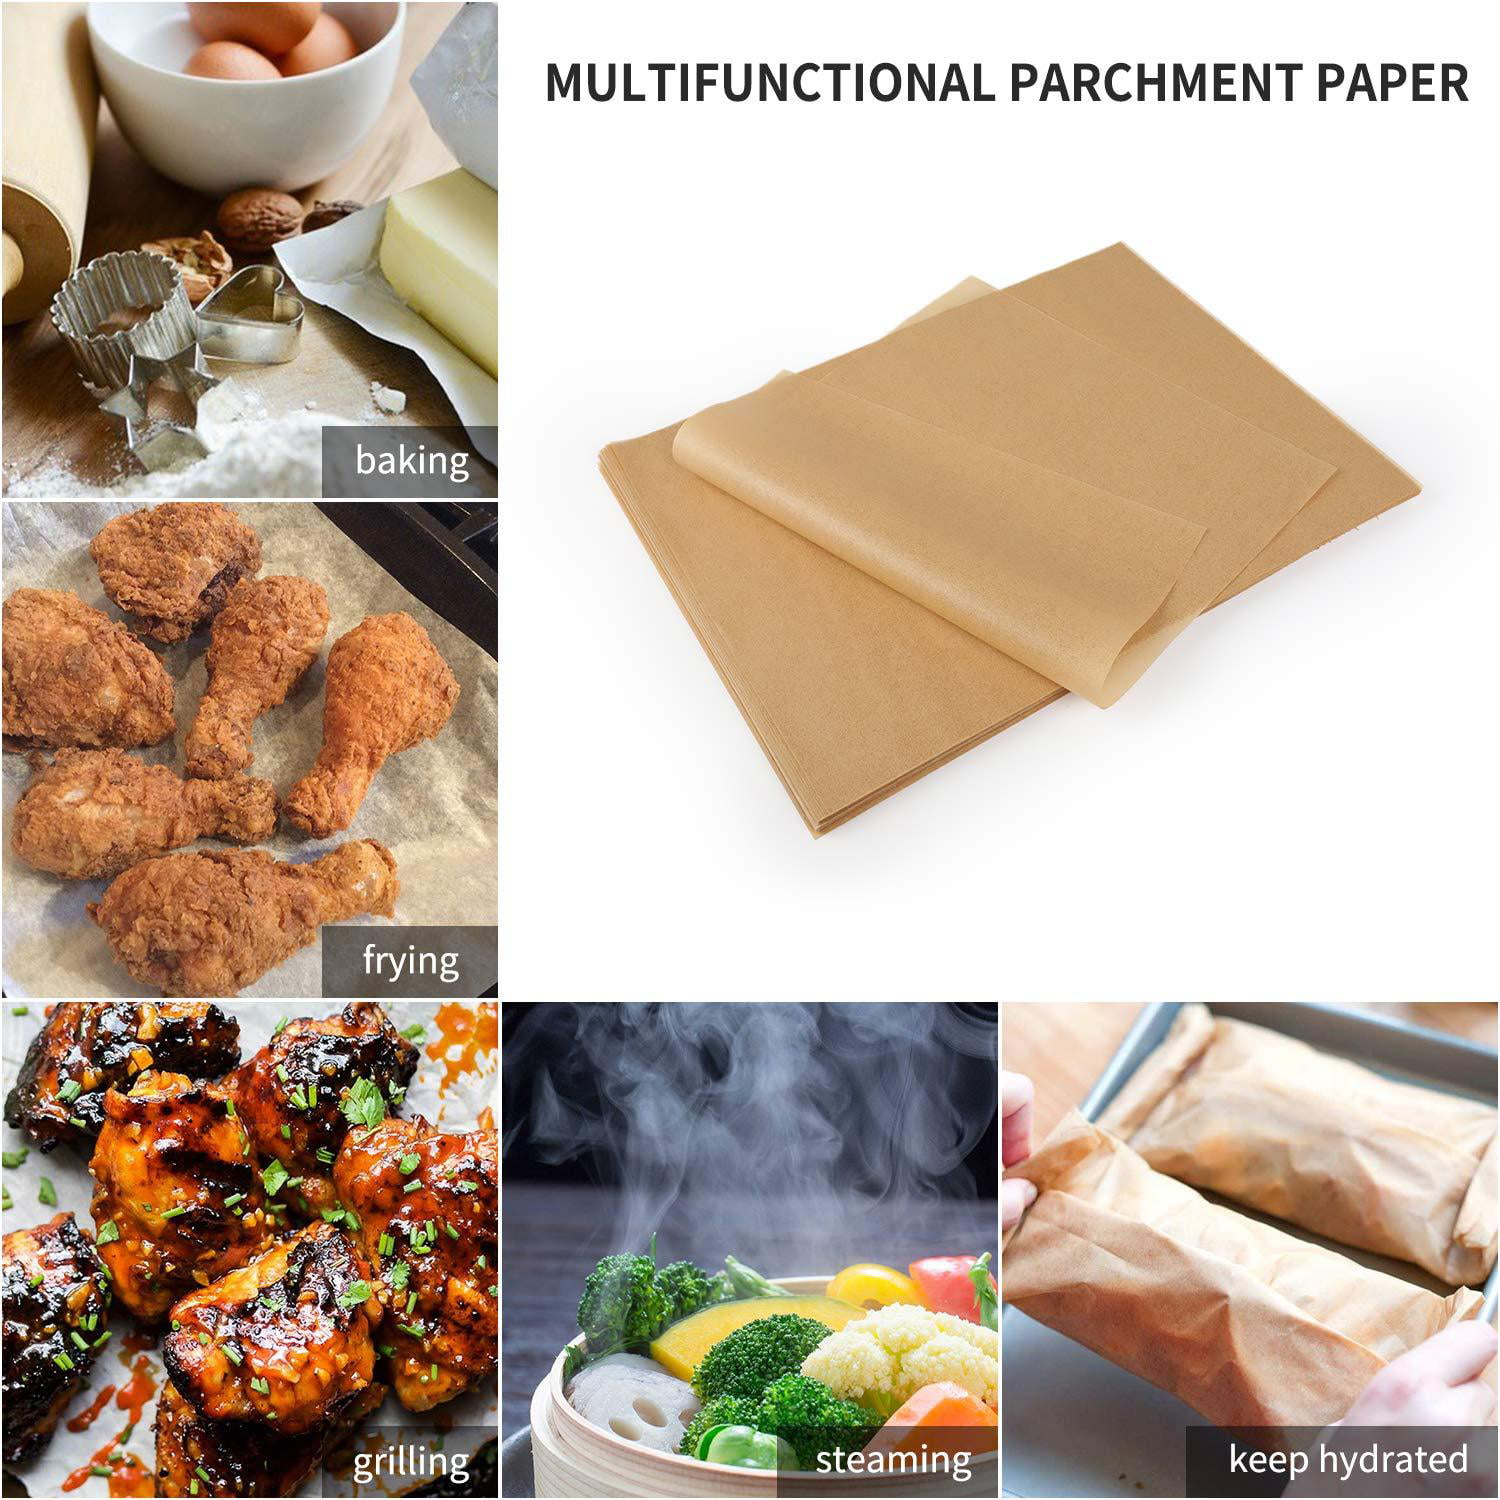 200-Pack Precut Parchment Paper Sheets 12 x 16 inches, Unbleached Brown  Nonstick Liners for Half Sheet Pan for Baking, Cooking, Grilling, Air  Fryer